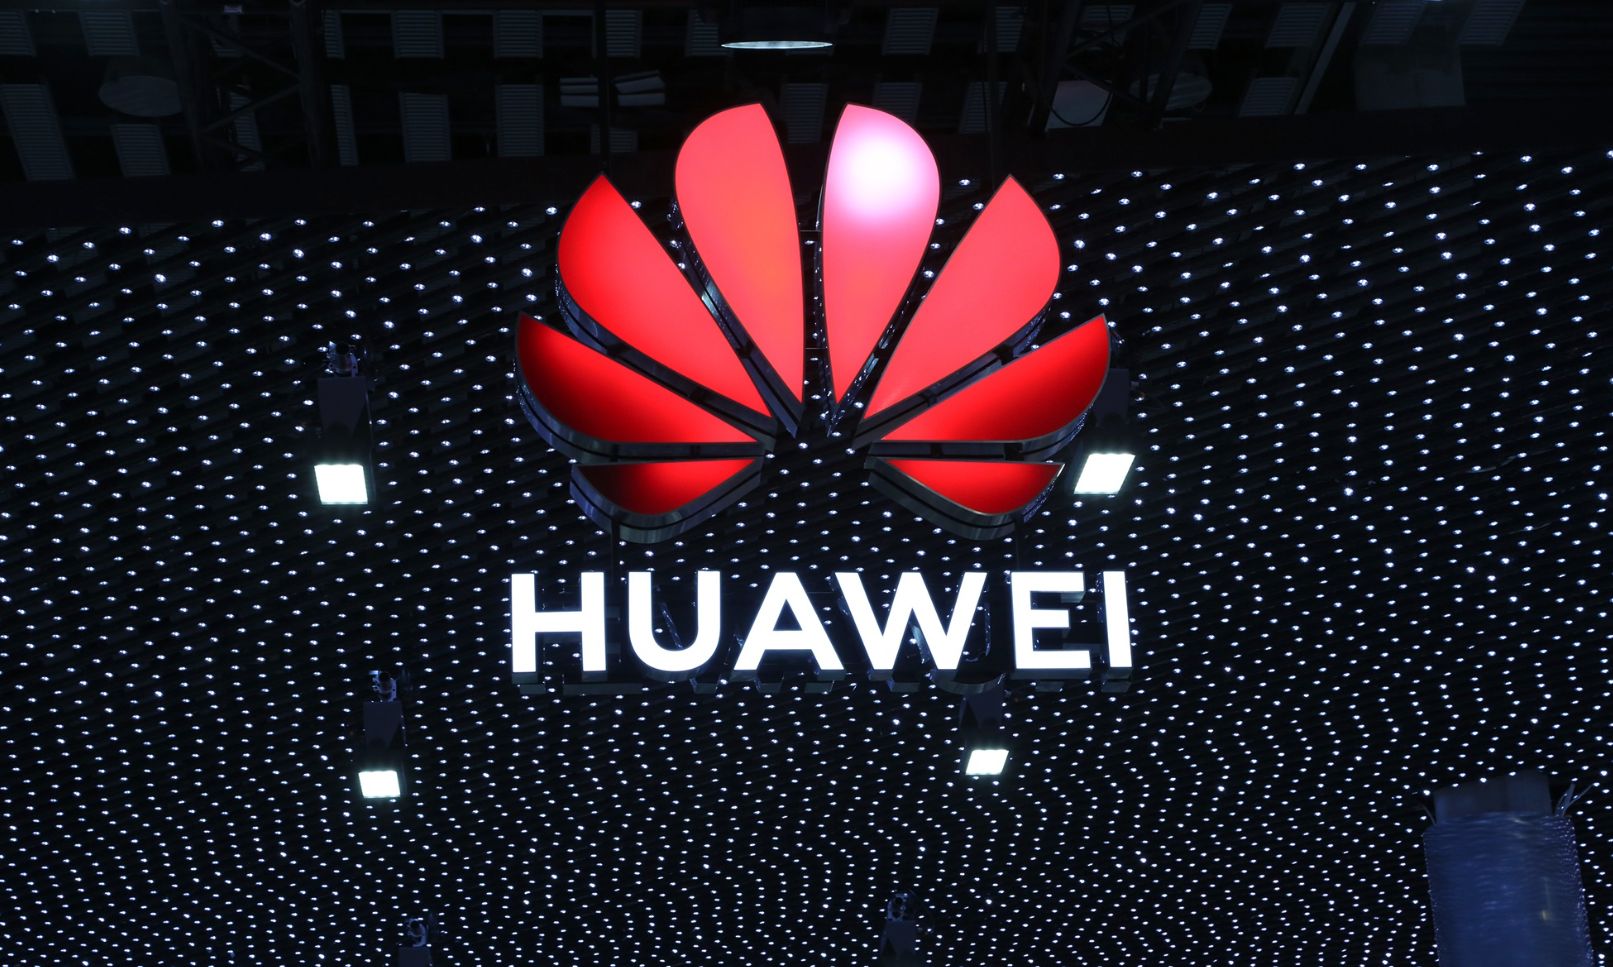 6g, Huawei is already researching 6G connectivity, although 5G is just entering the launch phase, 